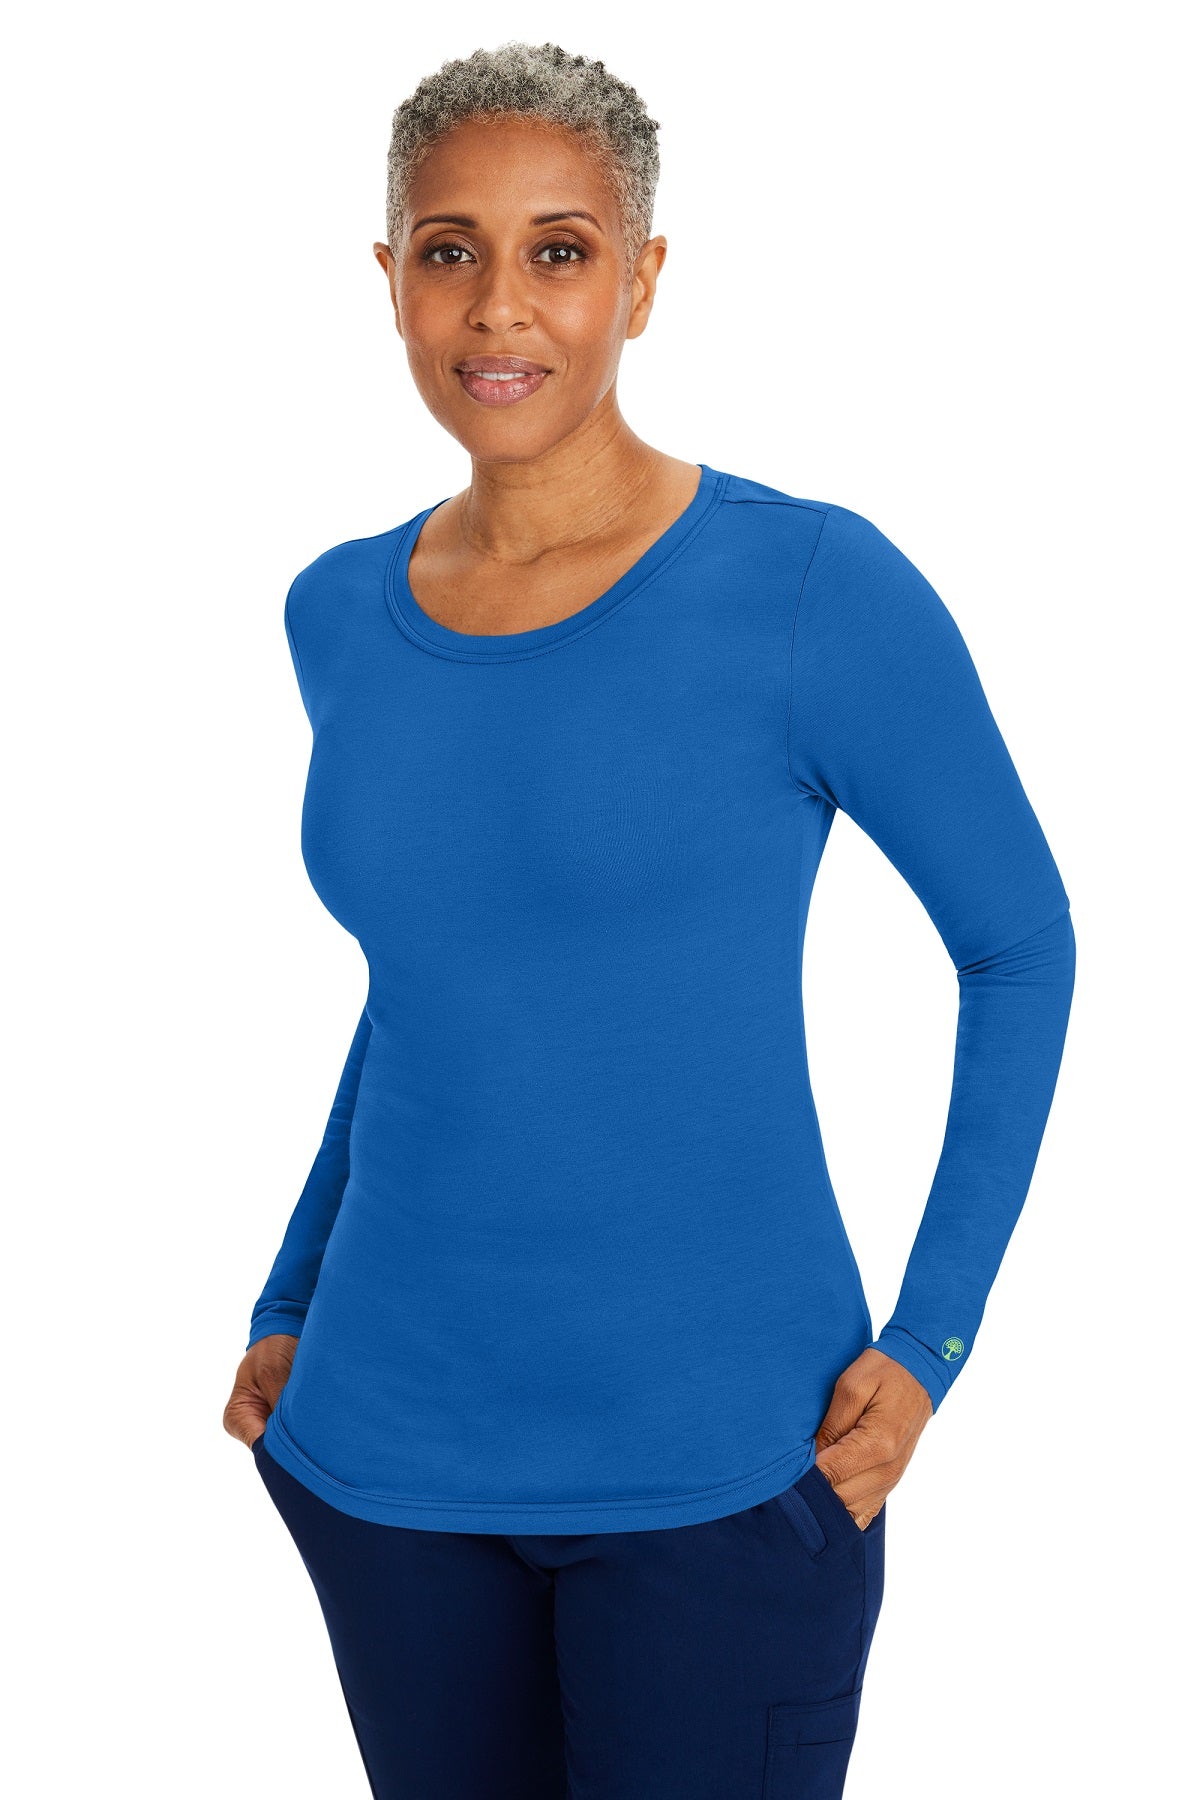 Healing Hands Purple Label Melissa Long Sleeve Tee in Royal at Parker's Clothing and Shoes.